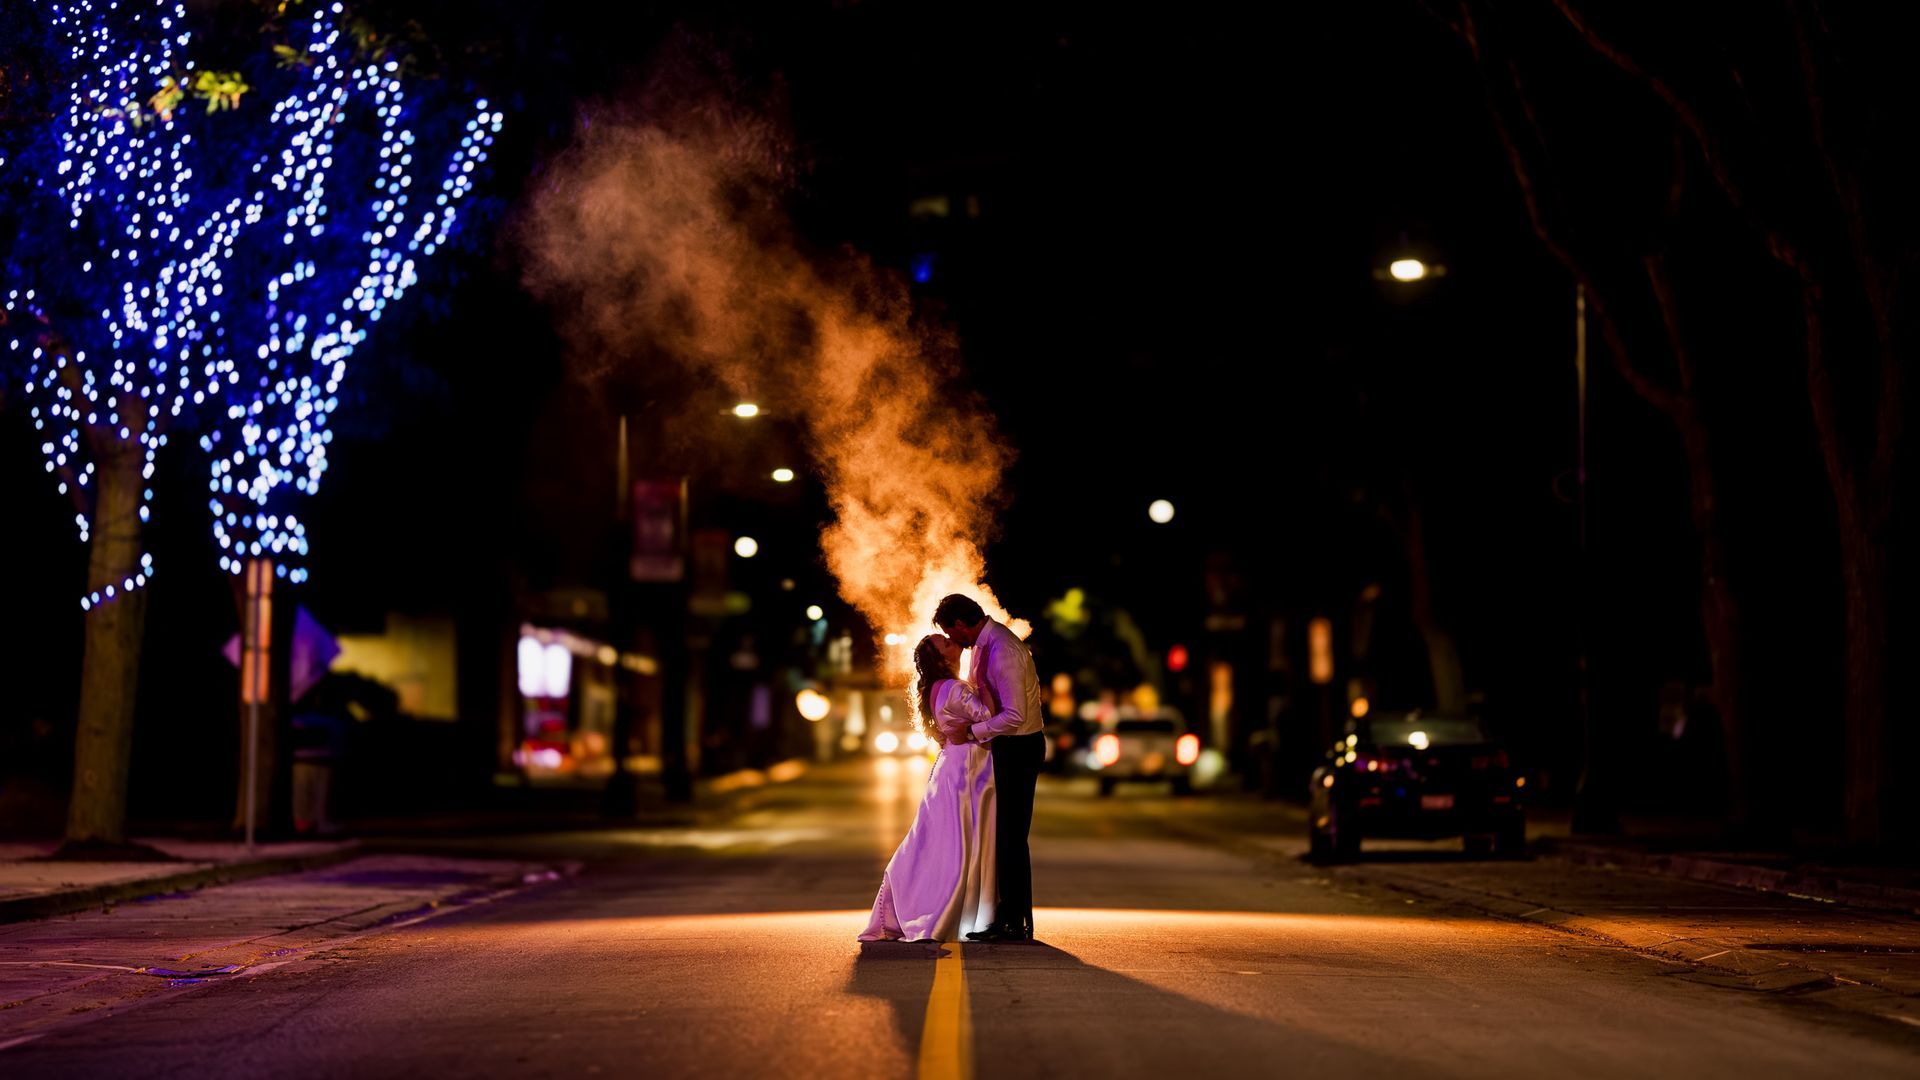 Wedding at the retro suites, Brian Groom outside on street night shot photography smoke behind